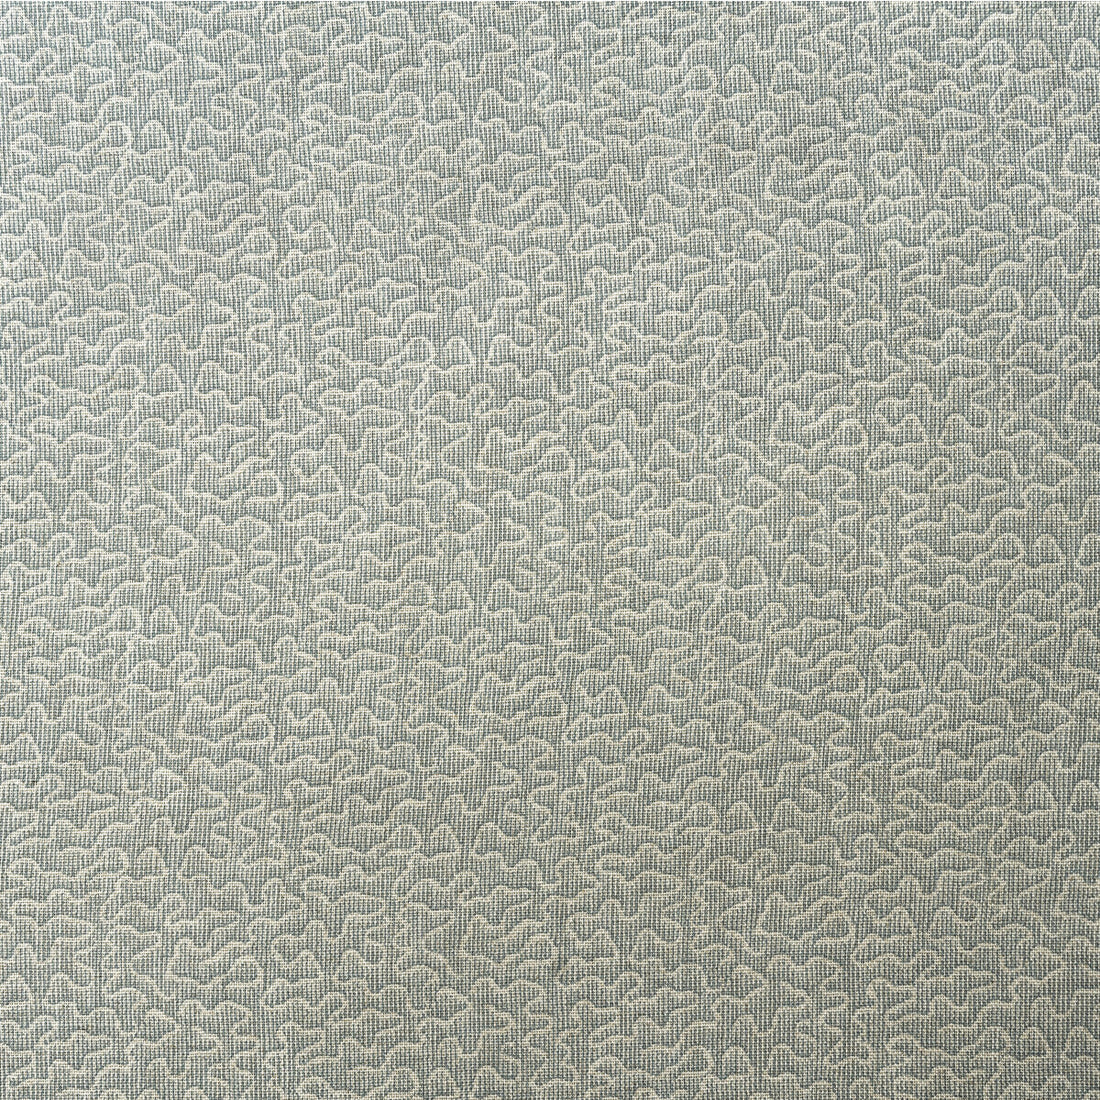 Pollen fabric in sky color - pattern AM100383.15.0 - by Kravet Couture in the Andrew Martin Garden Path collection